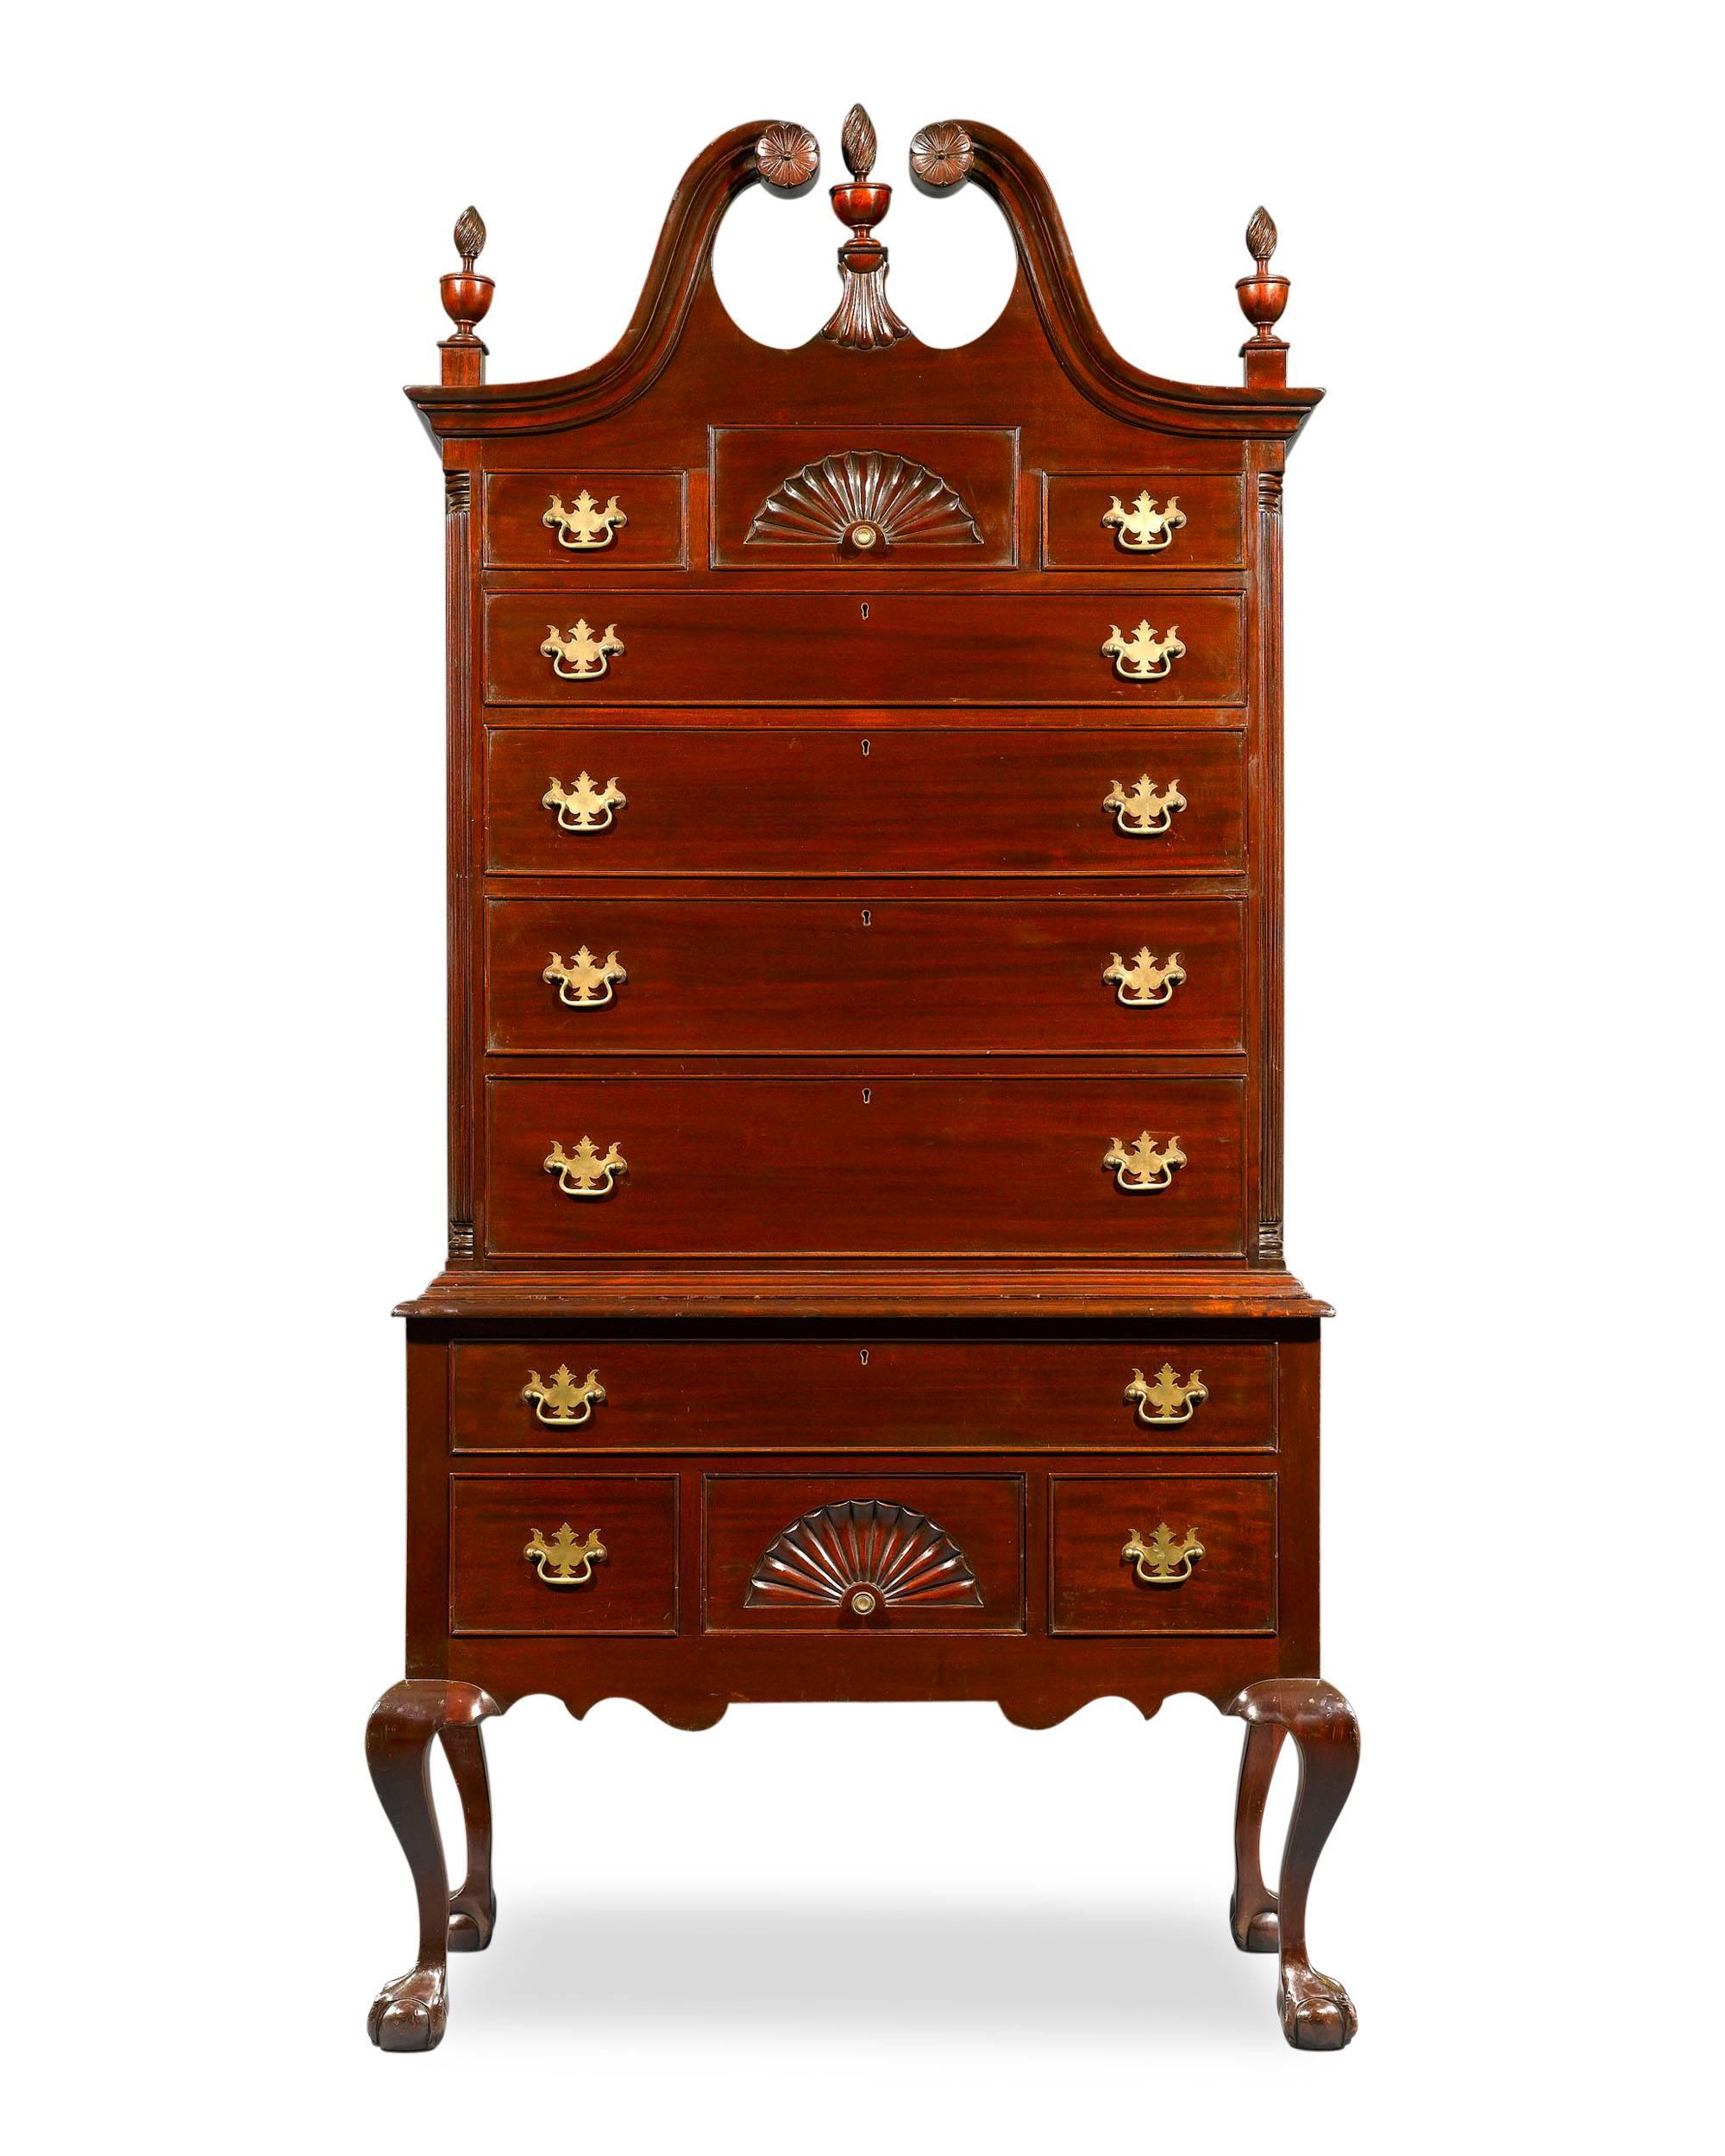 Subtle, yet impressive details adorn this rare and important Queen Anne style highboy chest-on-chest. Crafted of sturdy mahogany, this elegant chest displays all the hallmarks of the iconic Queen Anne style. The cresting wave of the broken pediment